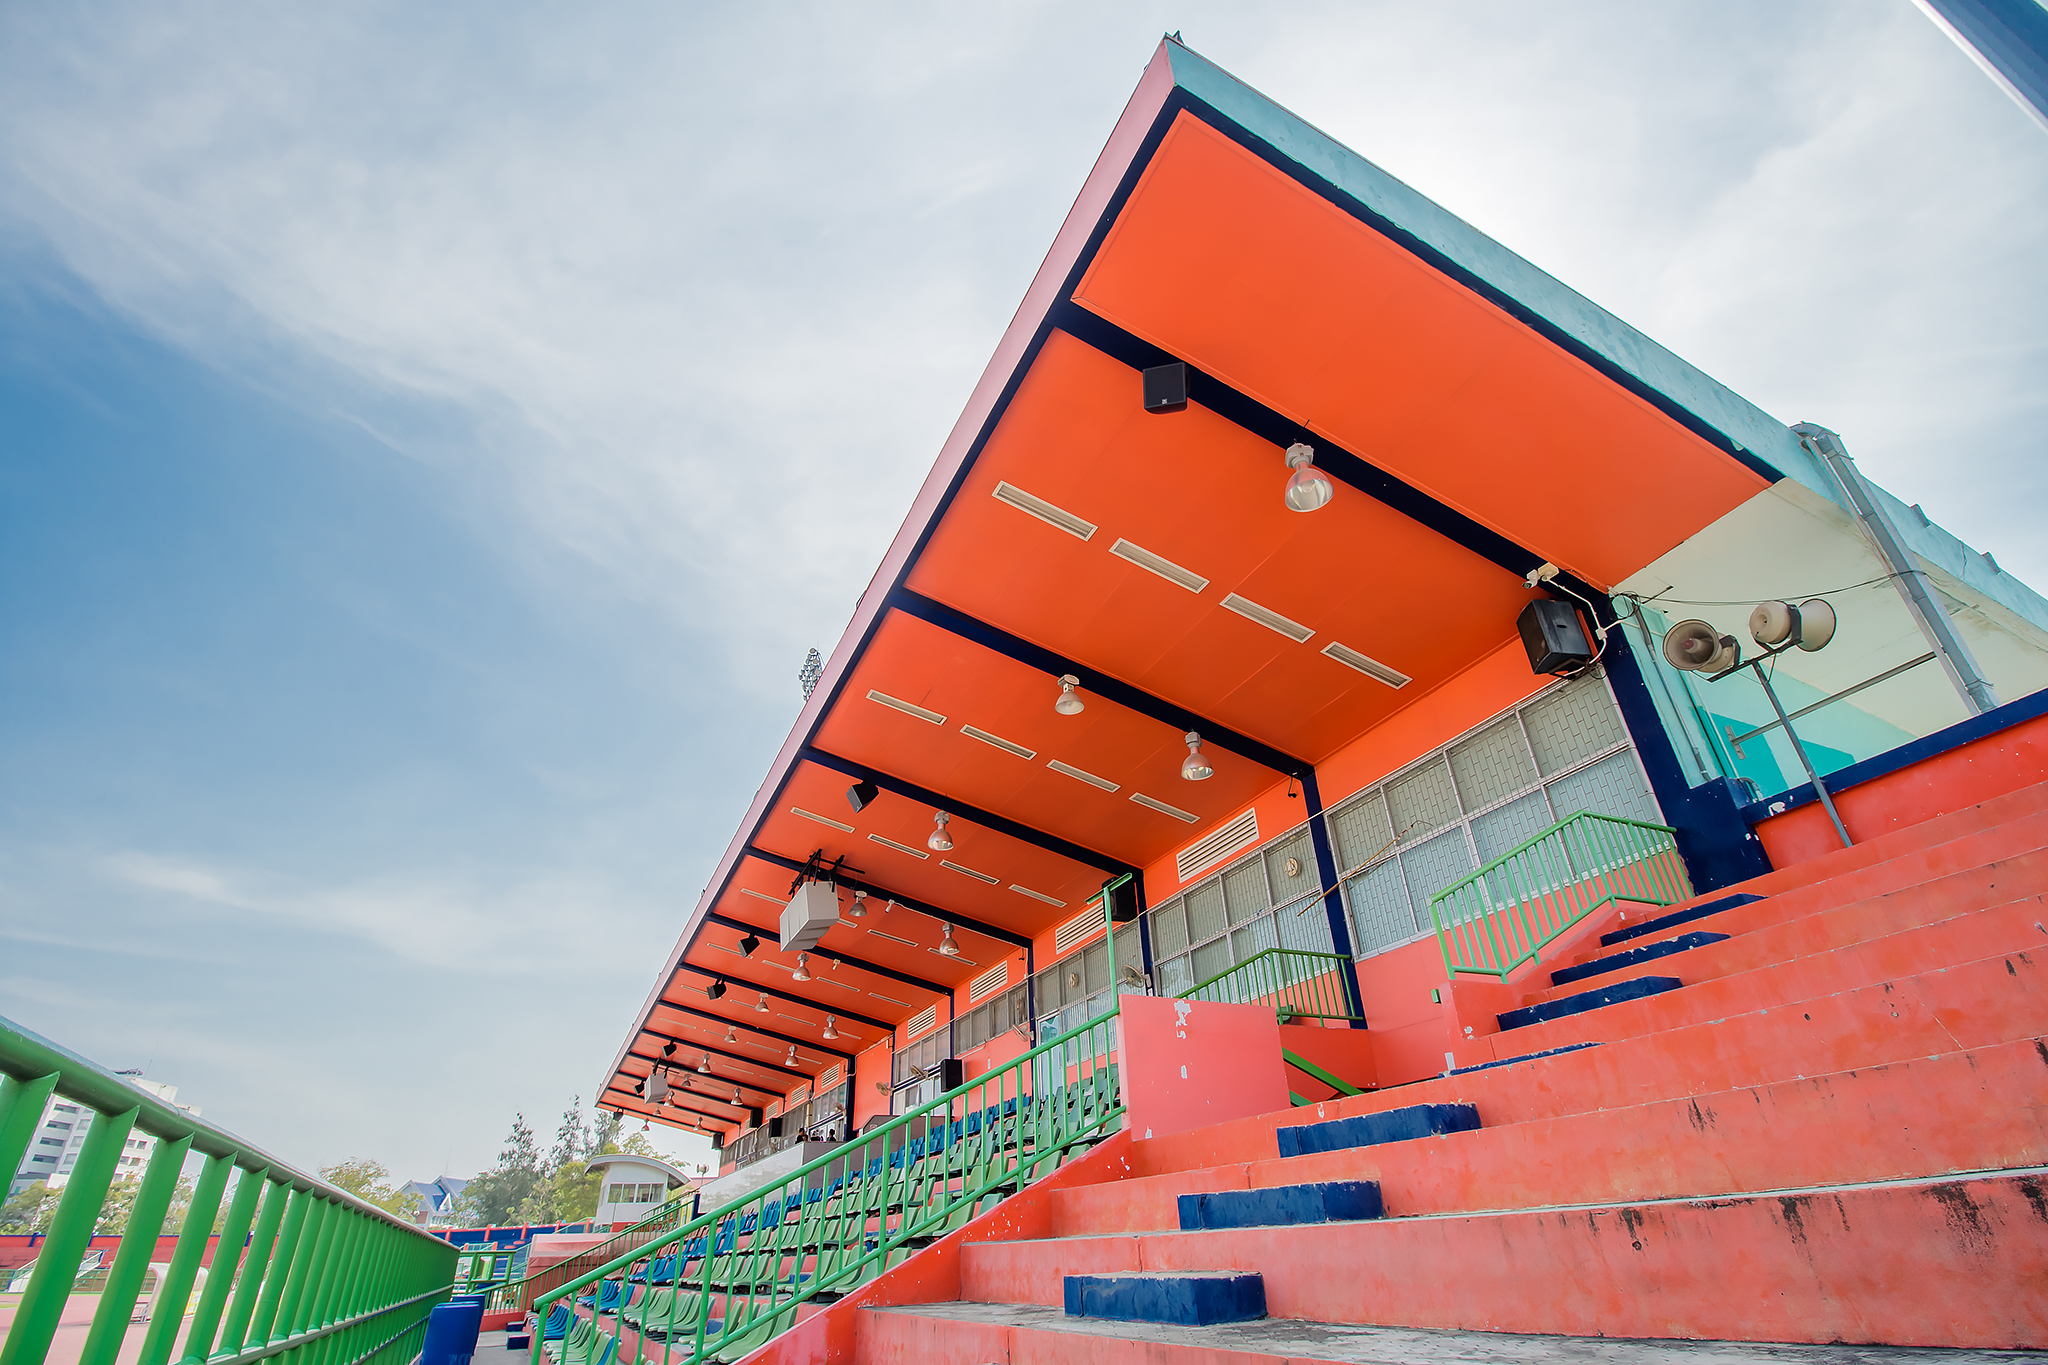 Ratchaburi Provincial Stadium Hosts Electrifying Events with a HARMAN Professional Solutions Networked AV System